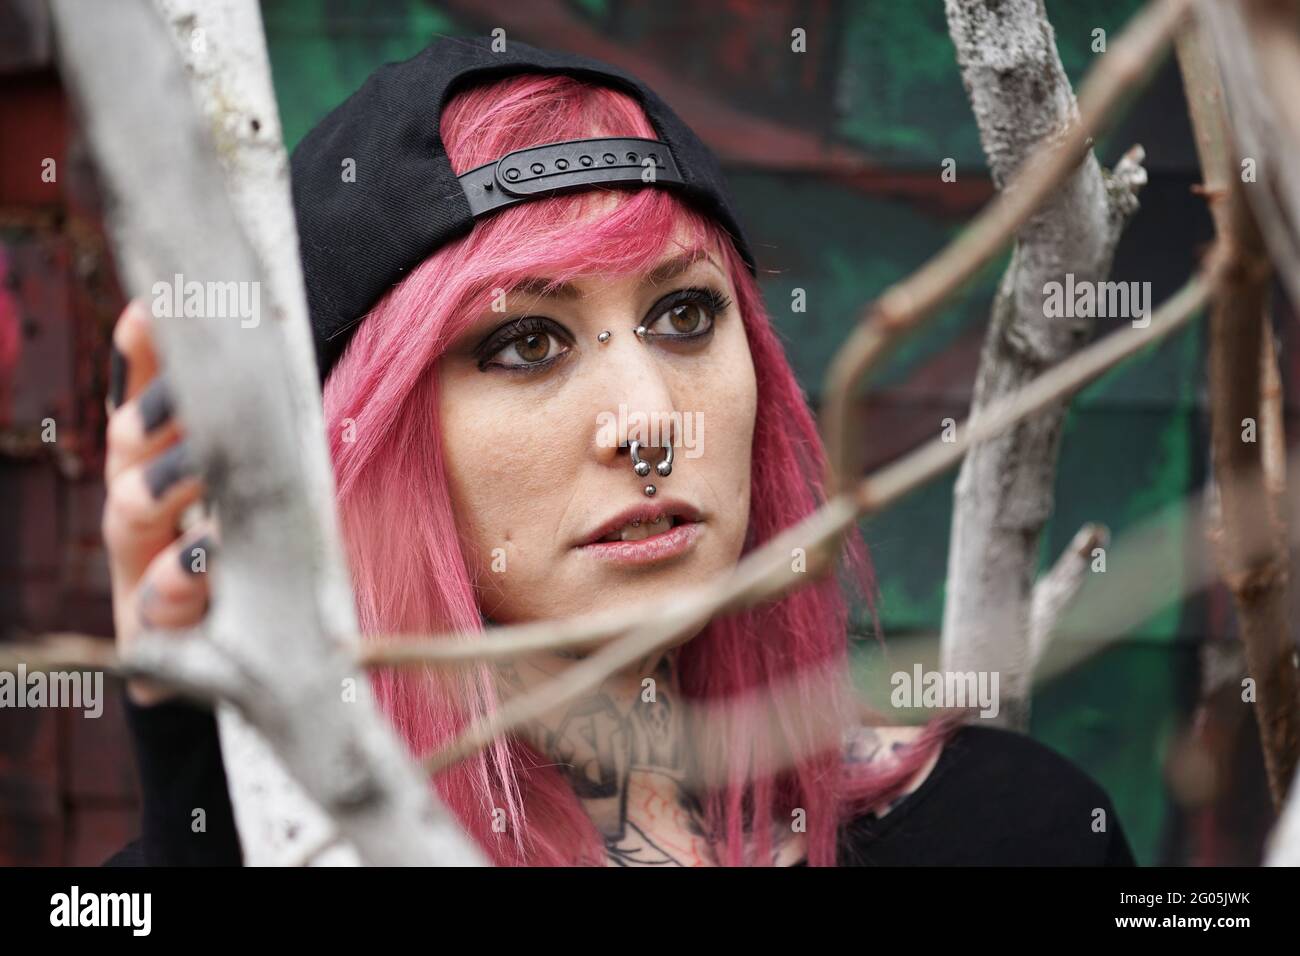 young woman with pierced face and tattooed neck behind tree branches Stock Photo